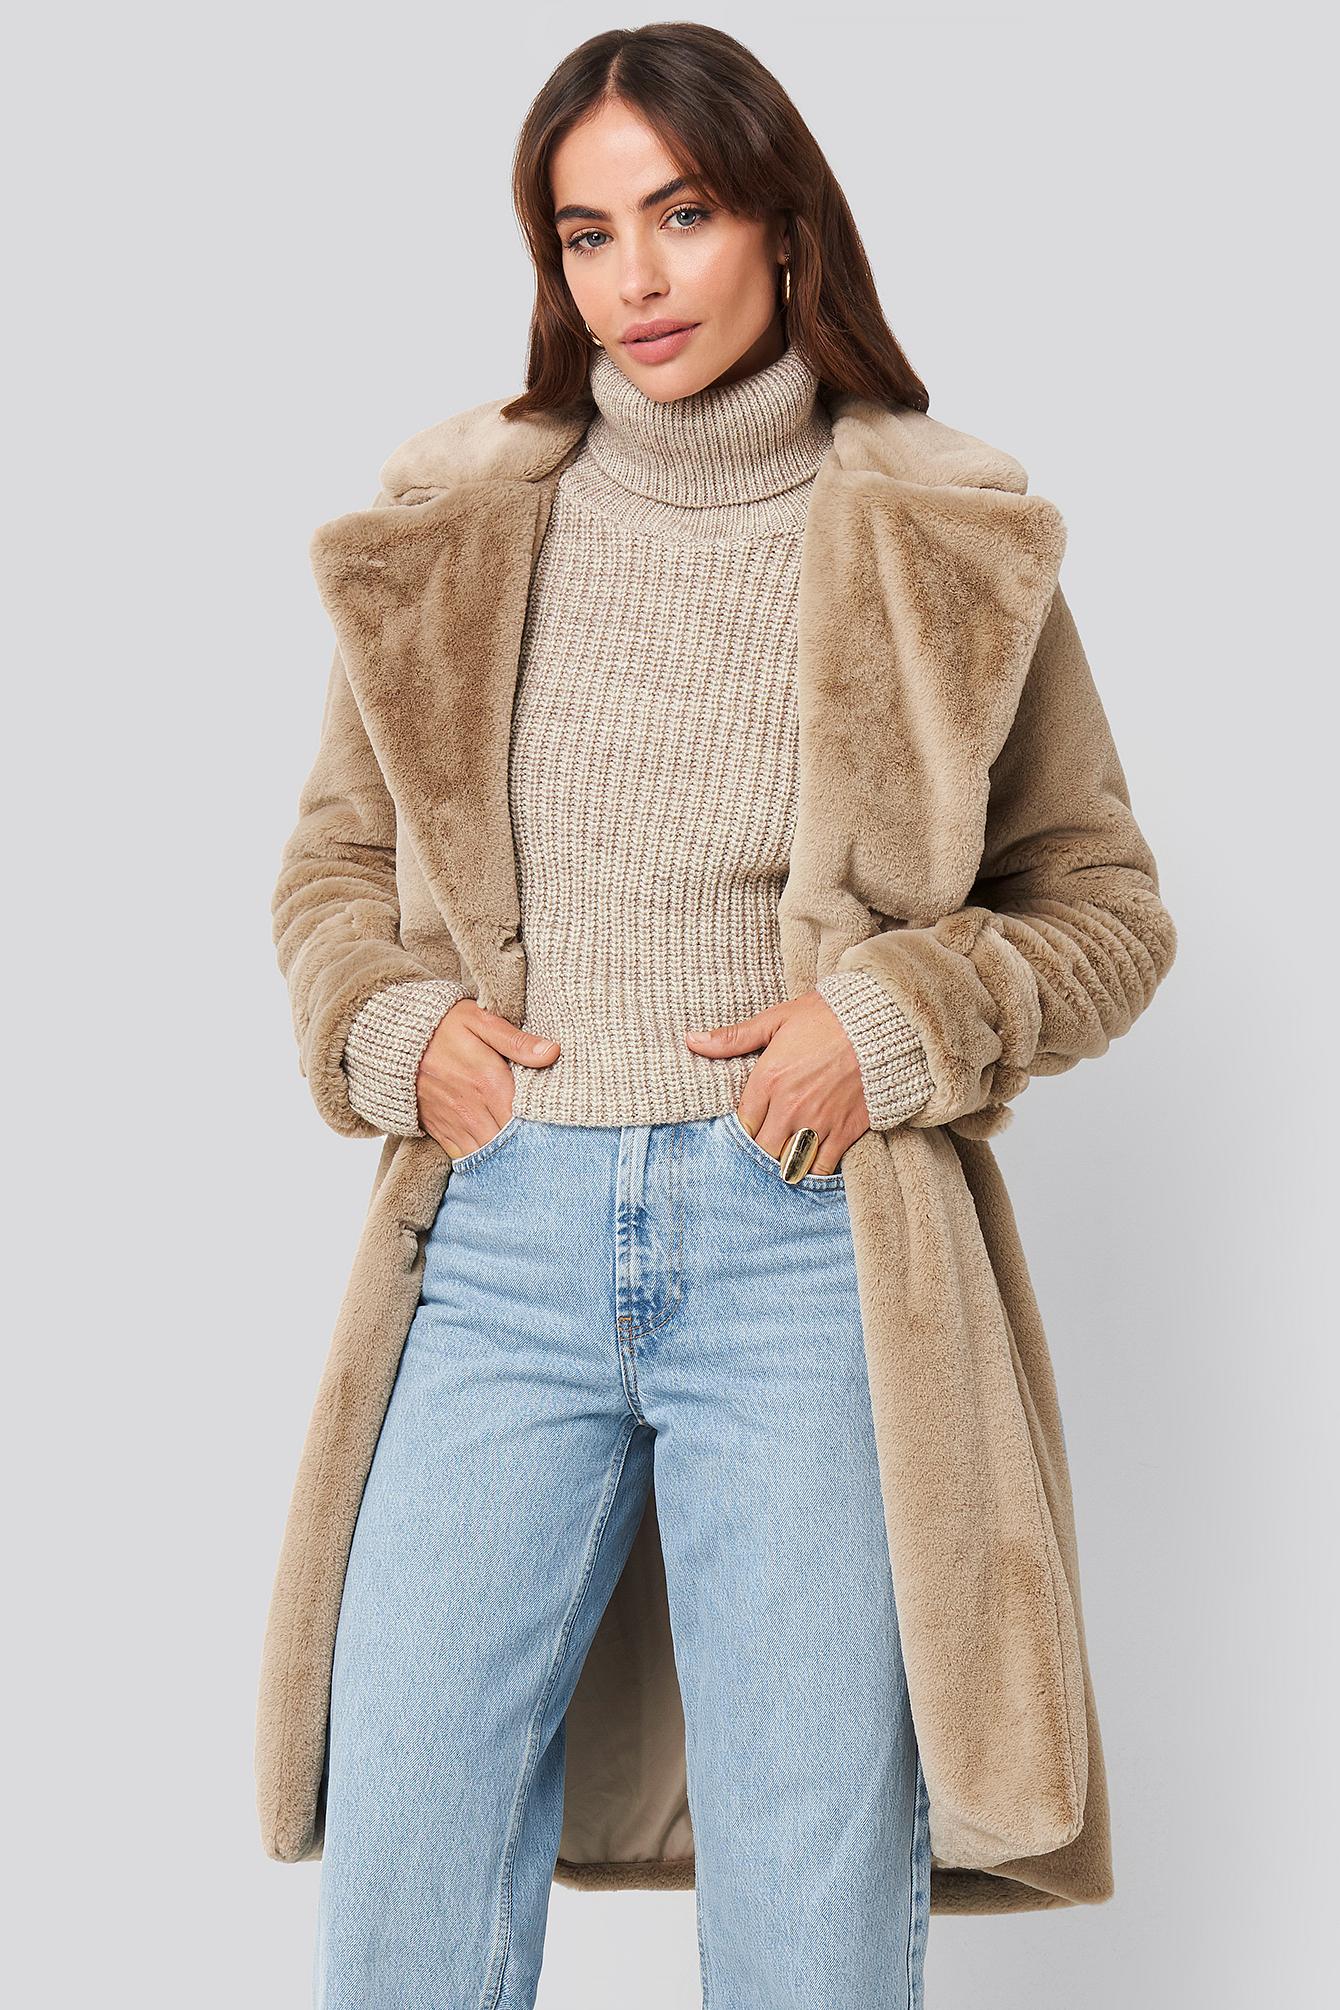 NA-KD Beige Double Breasted Belted Faux Fur Coat - Lyst